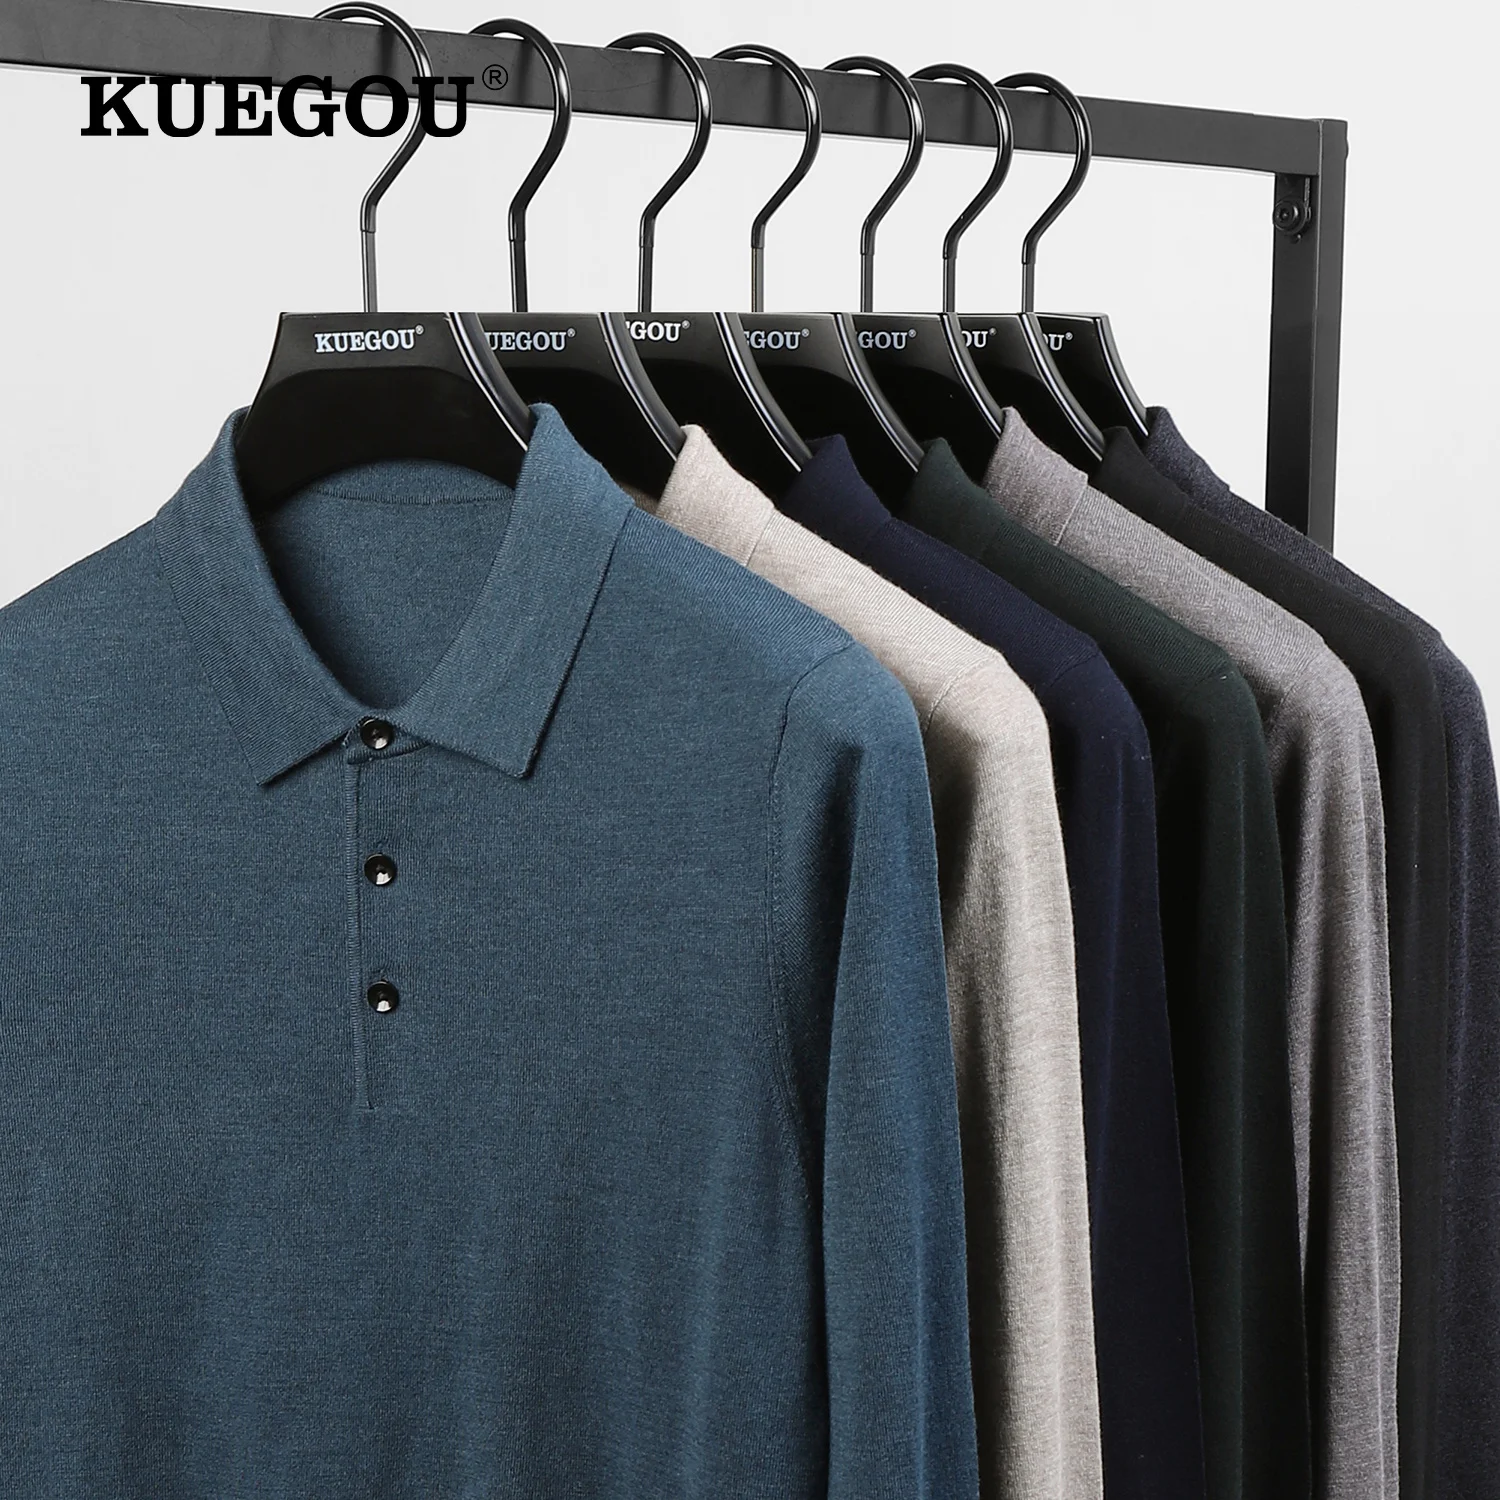 

KUEGOU 2022 Autumn Winter New Men Sweater Polo Shirt Collar Long Sleeves Pullovers Quality Slim Knitted Wool Blend Warm Top 721